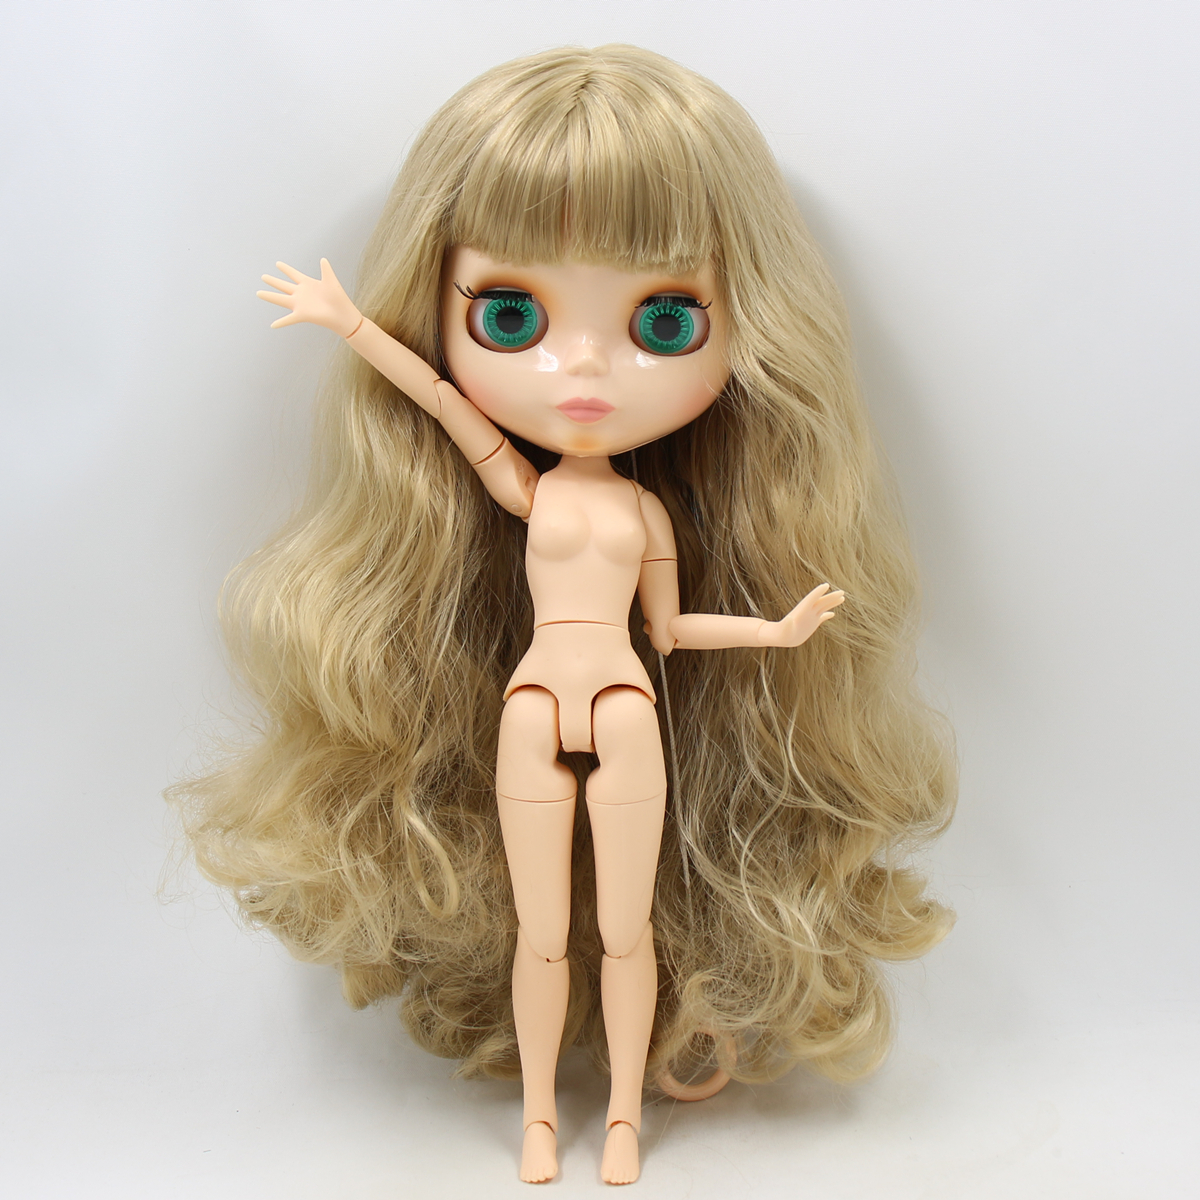 ICY DBS Blyth doll toy 30cm 1/6 bjd natural skin joint body shiny face articulated doll random eyes colors